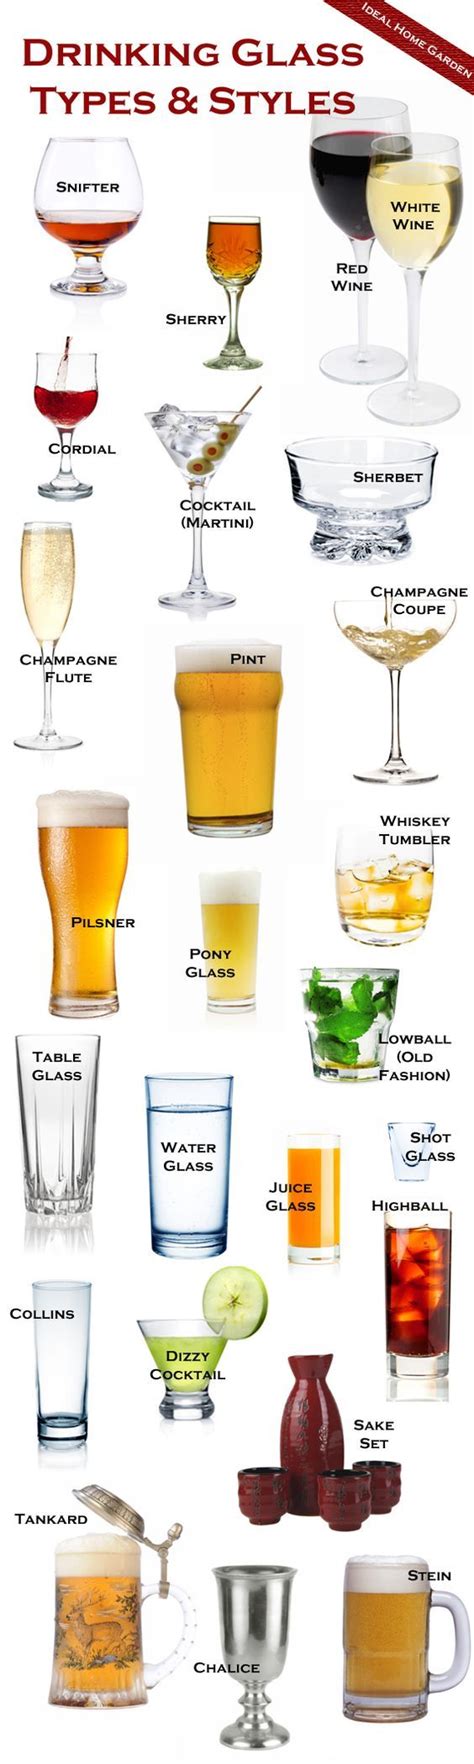 Types Of Drinking Glasses And Their Uses Ideal Home Garden Dezdemon